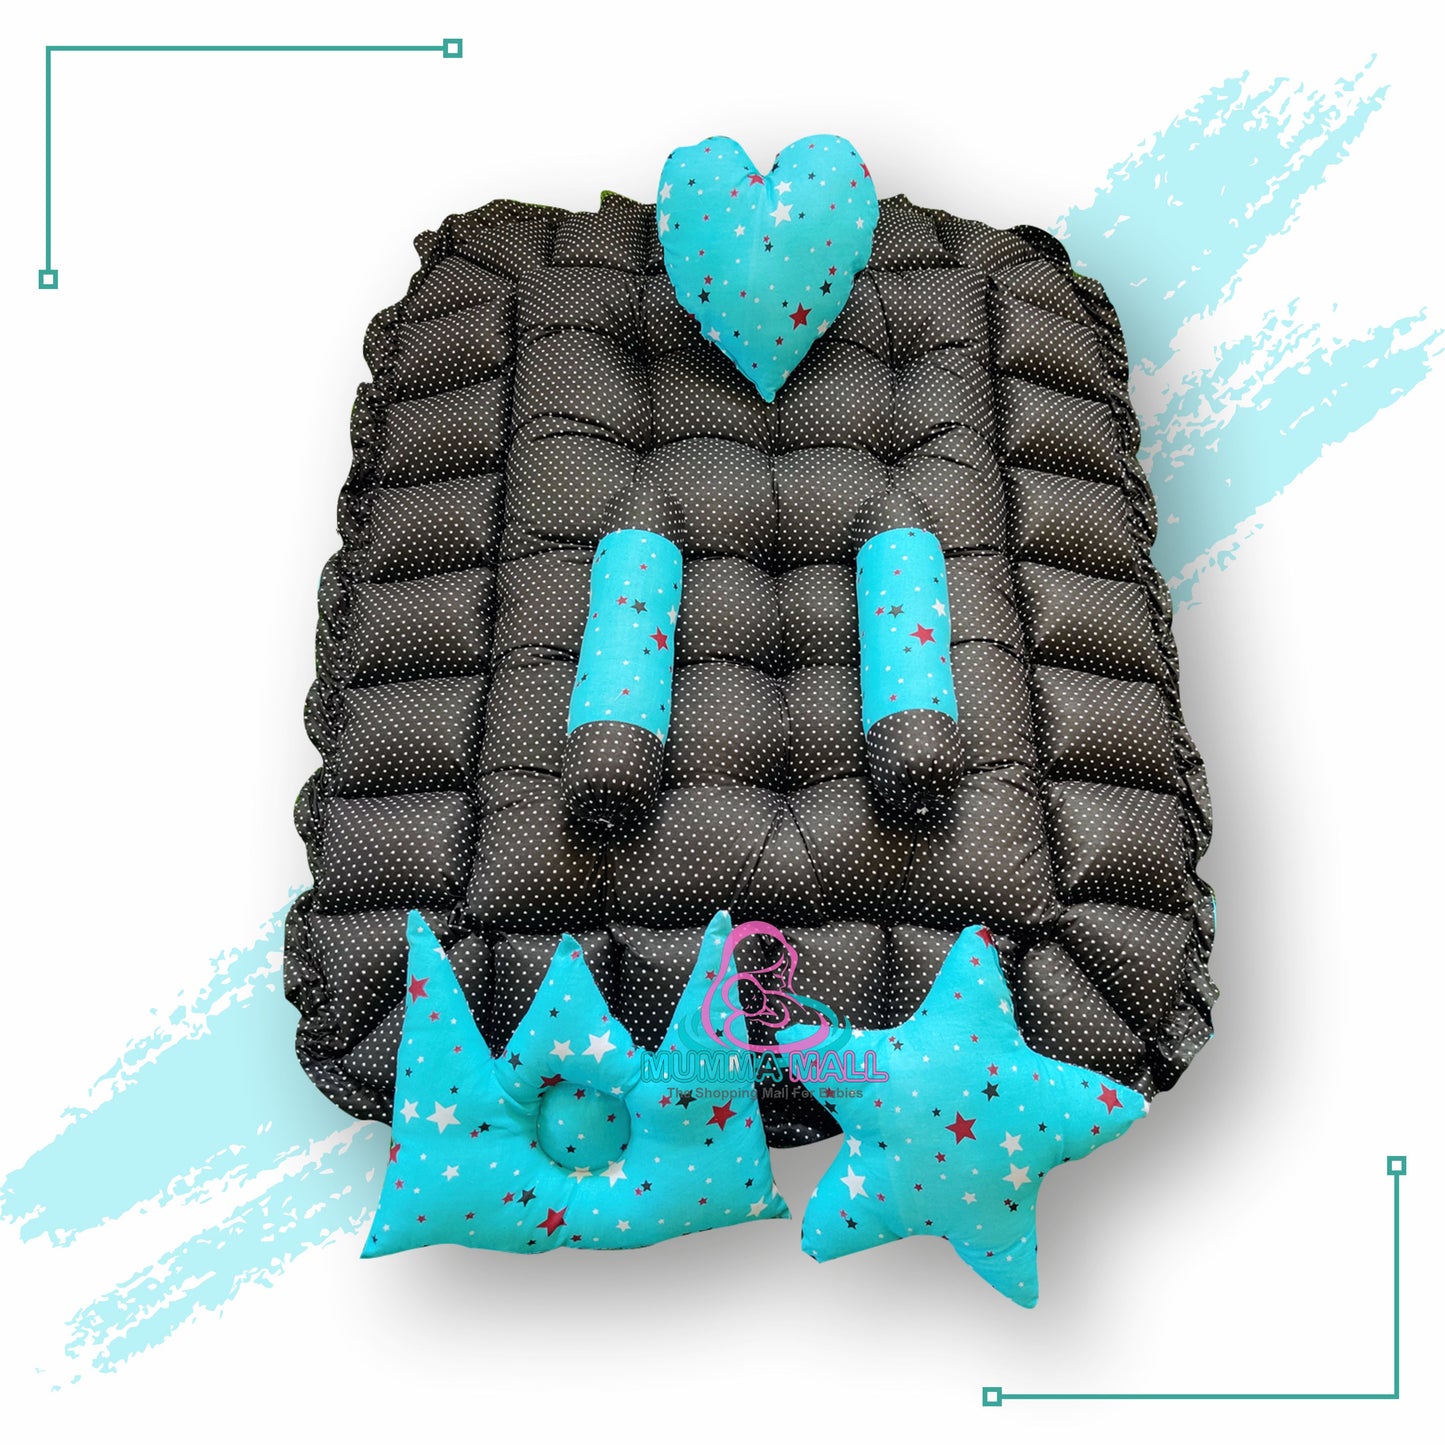 Rectangle baby tub bed with with set of 5 pillows as neck support, side support and toy (Turquoise and Black)